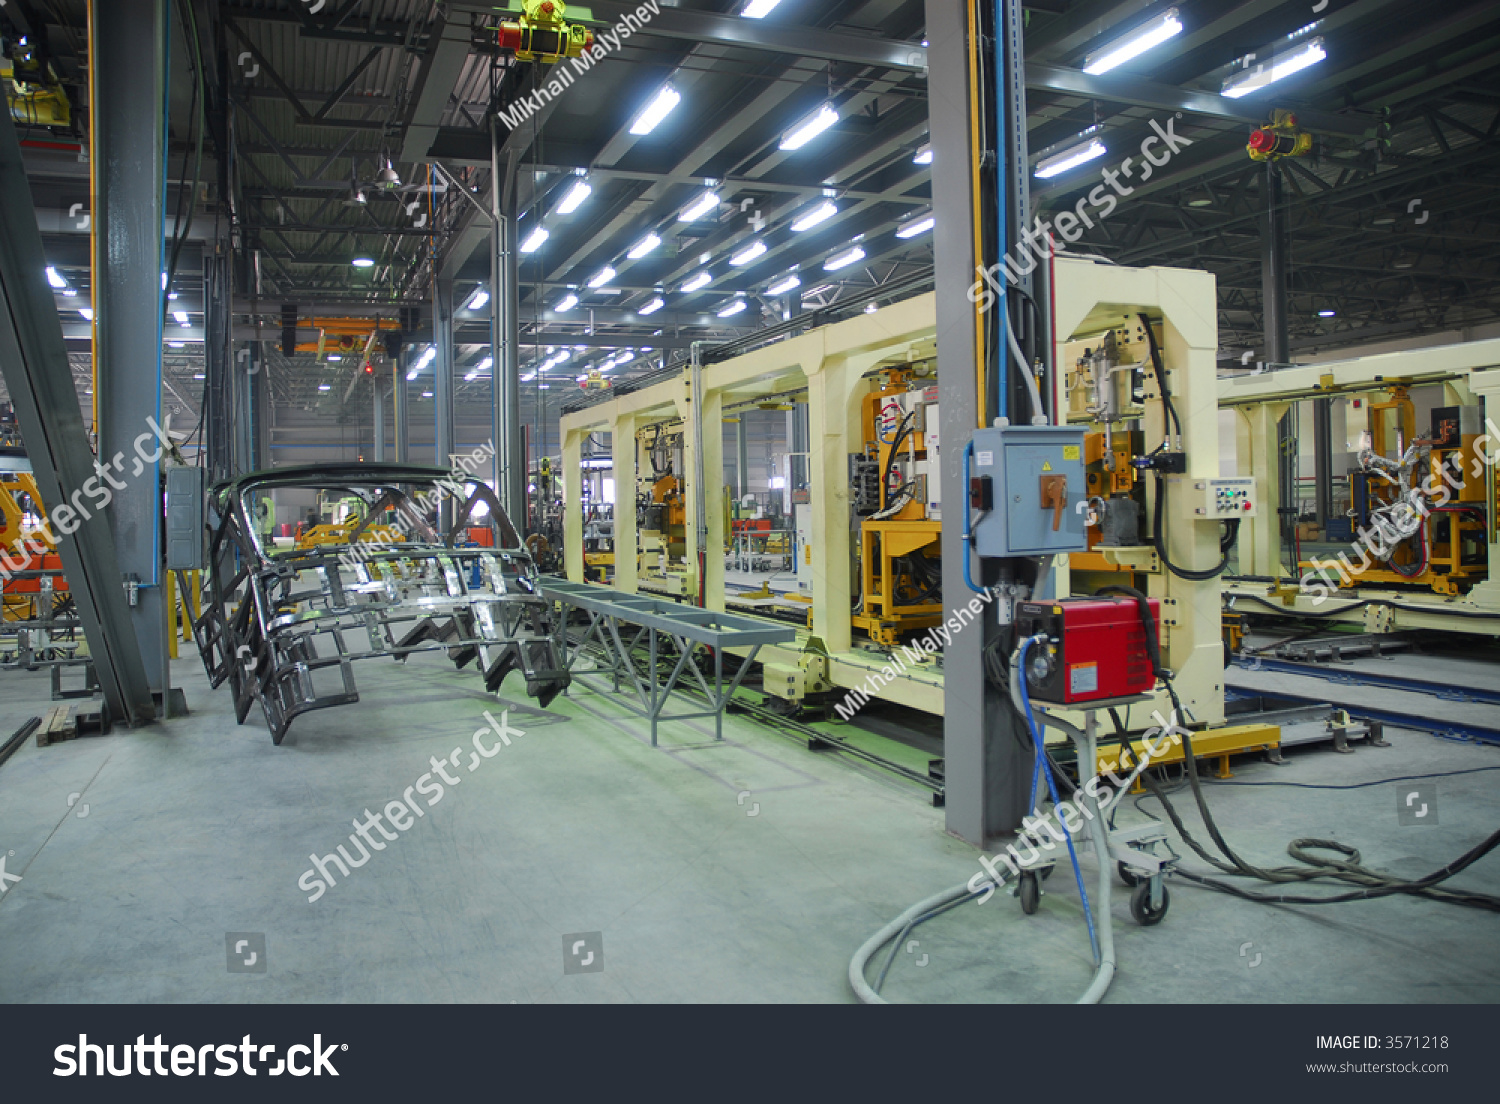 Big Factory With A Lot Of Machine Tools. 15 Stock Photo 3571218 ...